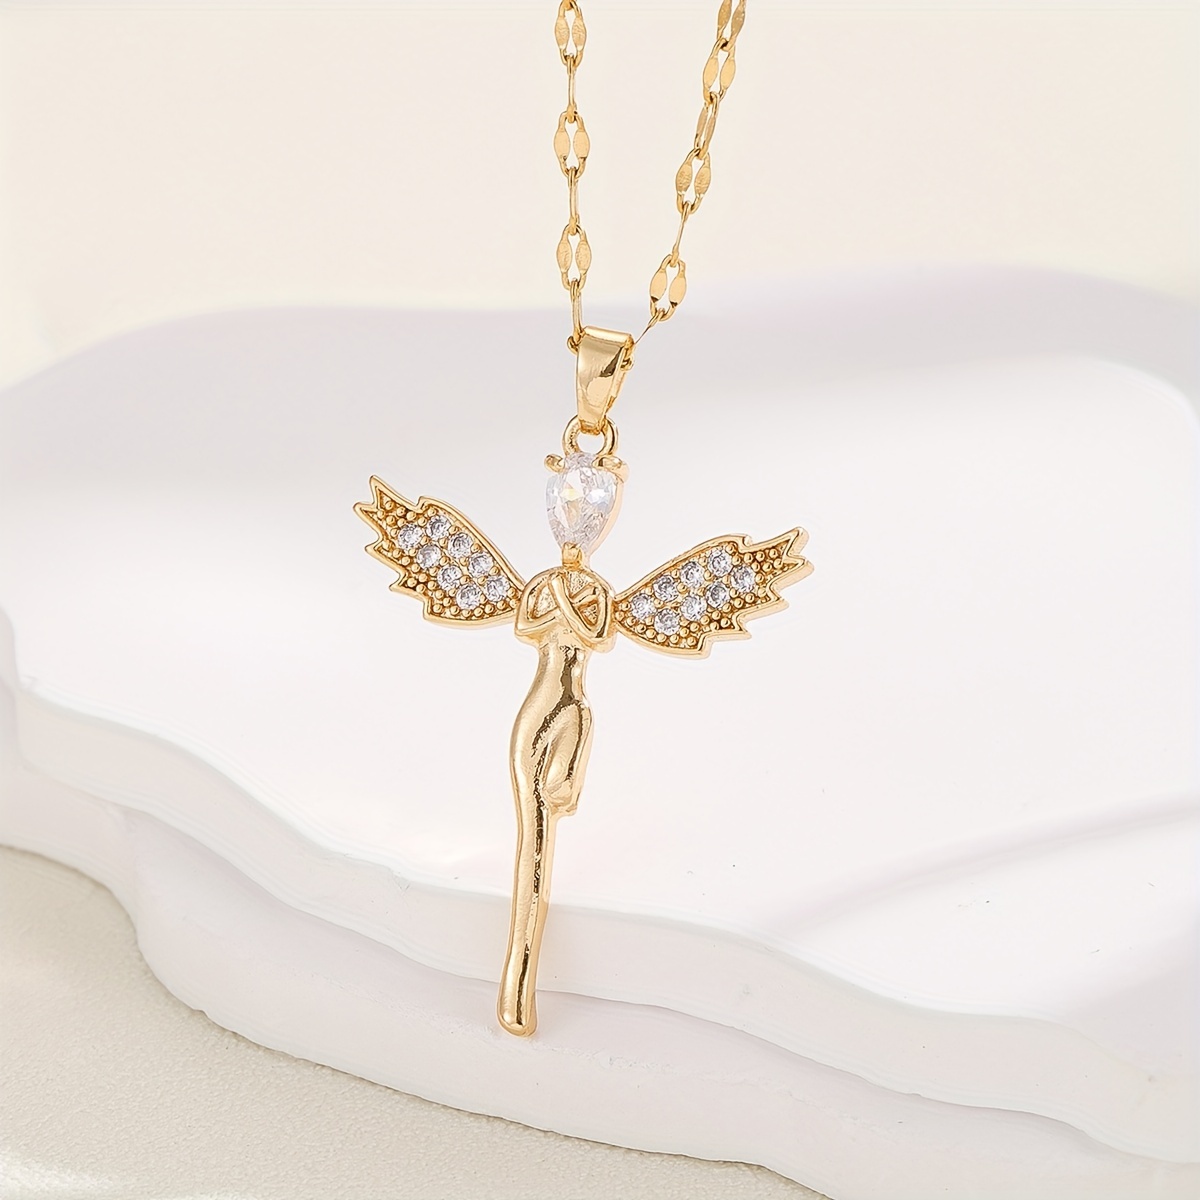 Vintage Funky Punk Cartoon Angel Wings Goddess Pendant Necklace Jewelry  Accessories Gifts For Men Women